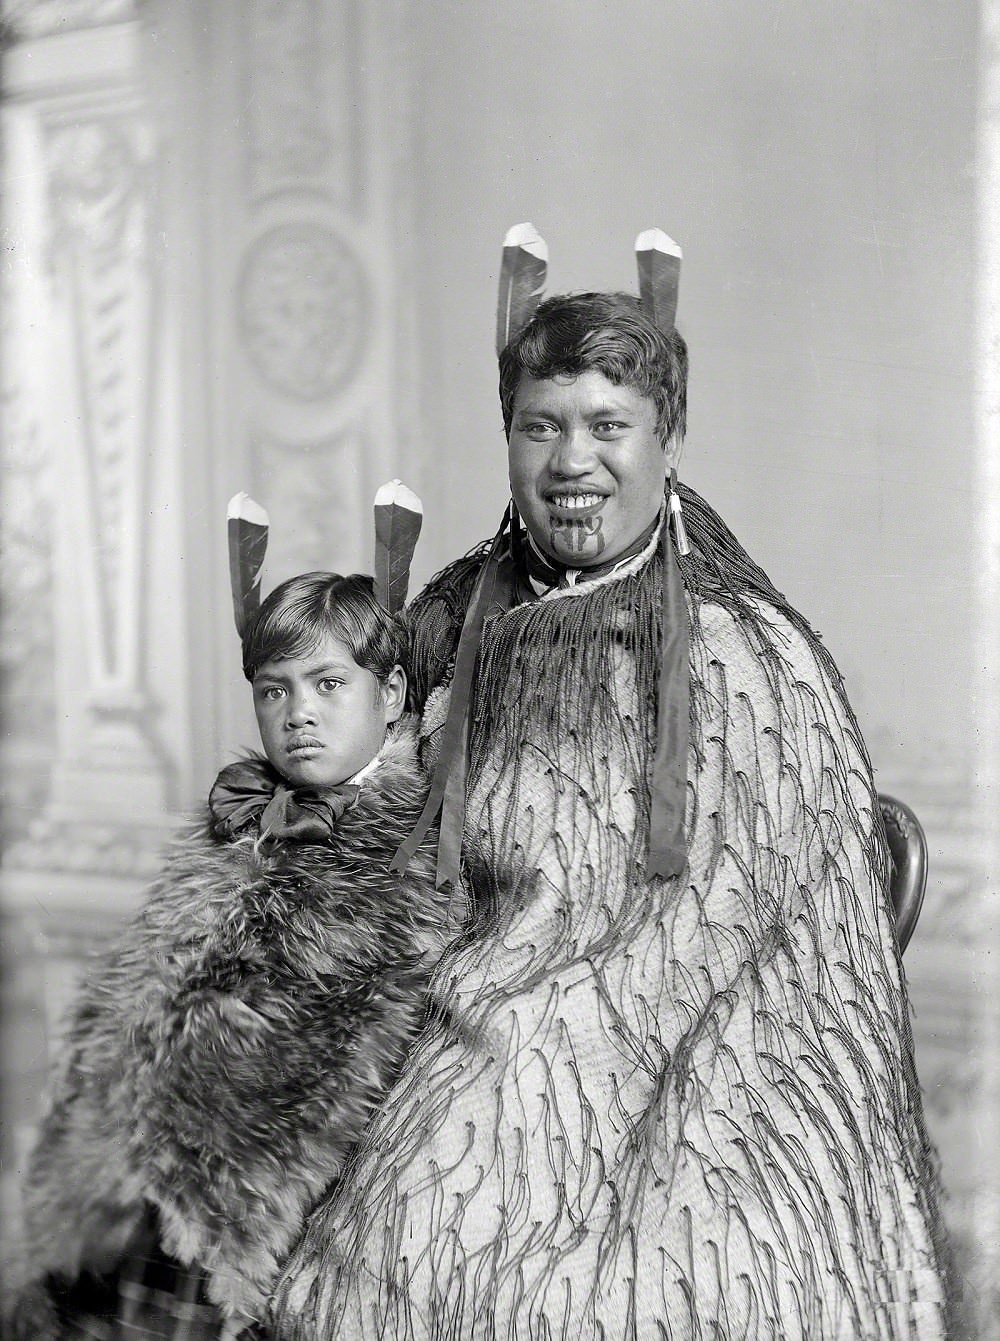 Carte de visite portrait, Maori woman and child from Hawkes Bay, New Zealand, 1890s